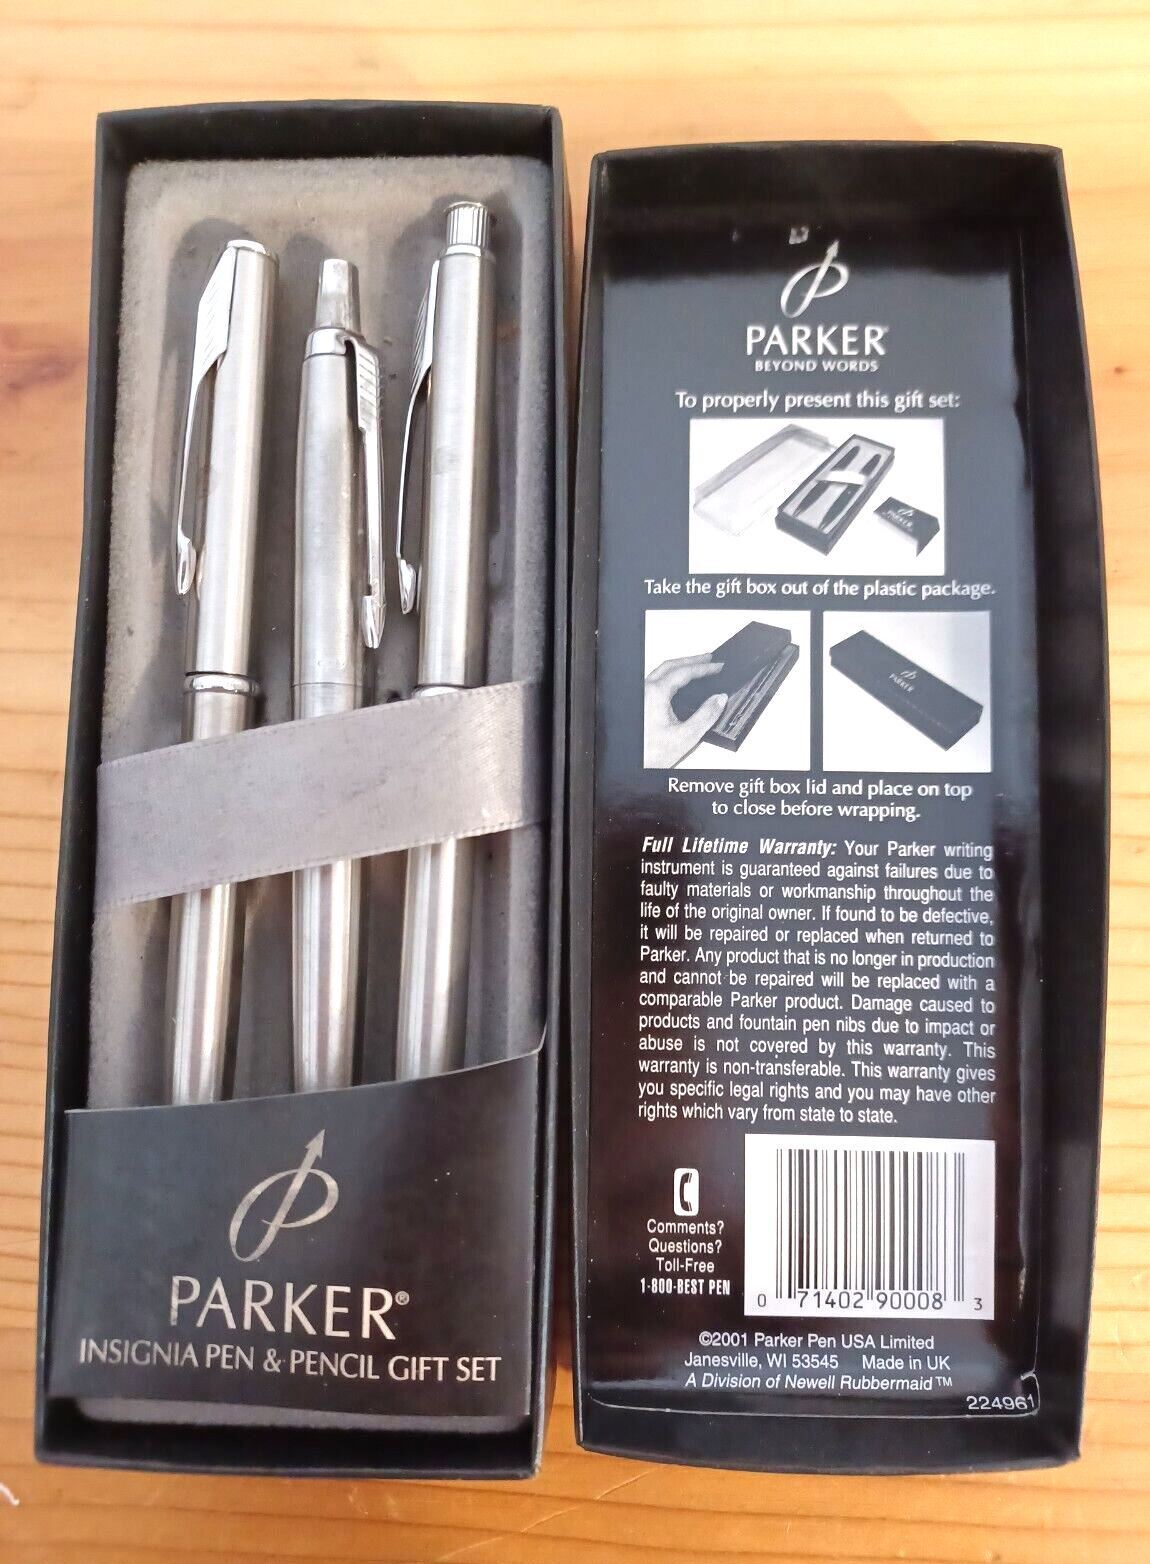 VTG 2001 Parker Insignia Silver Pen Pencil Gift 3 Pc. Set w Box Preowned Works